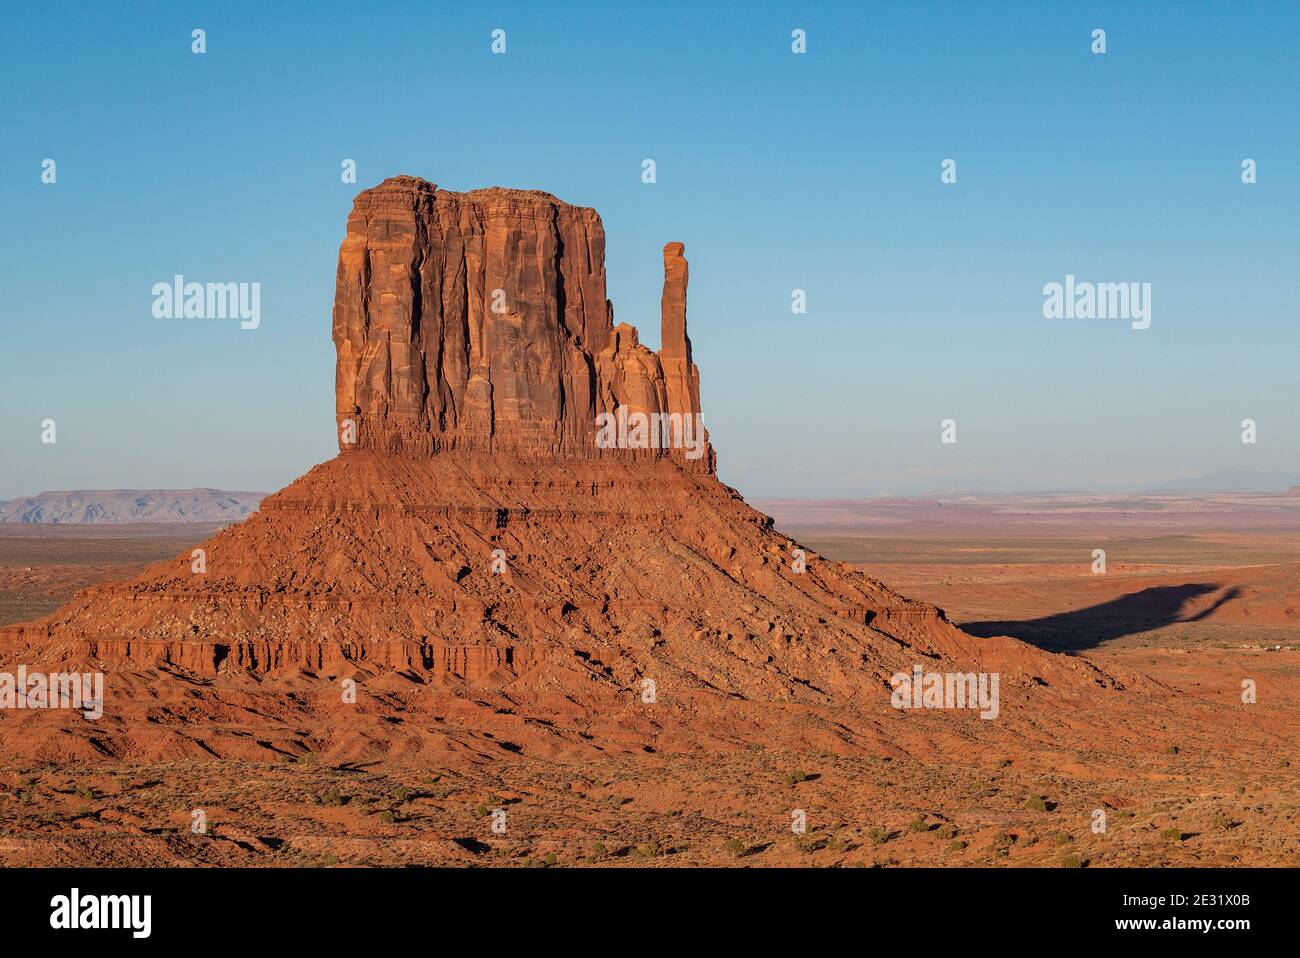 The famous West Mitten rock formation at sunset in Monument Valley Navajo Tribal Park which straddles the Arizona and Utah state line, USA Stock Photo